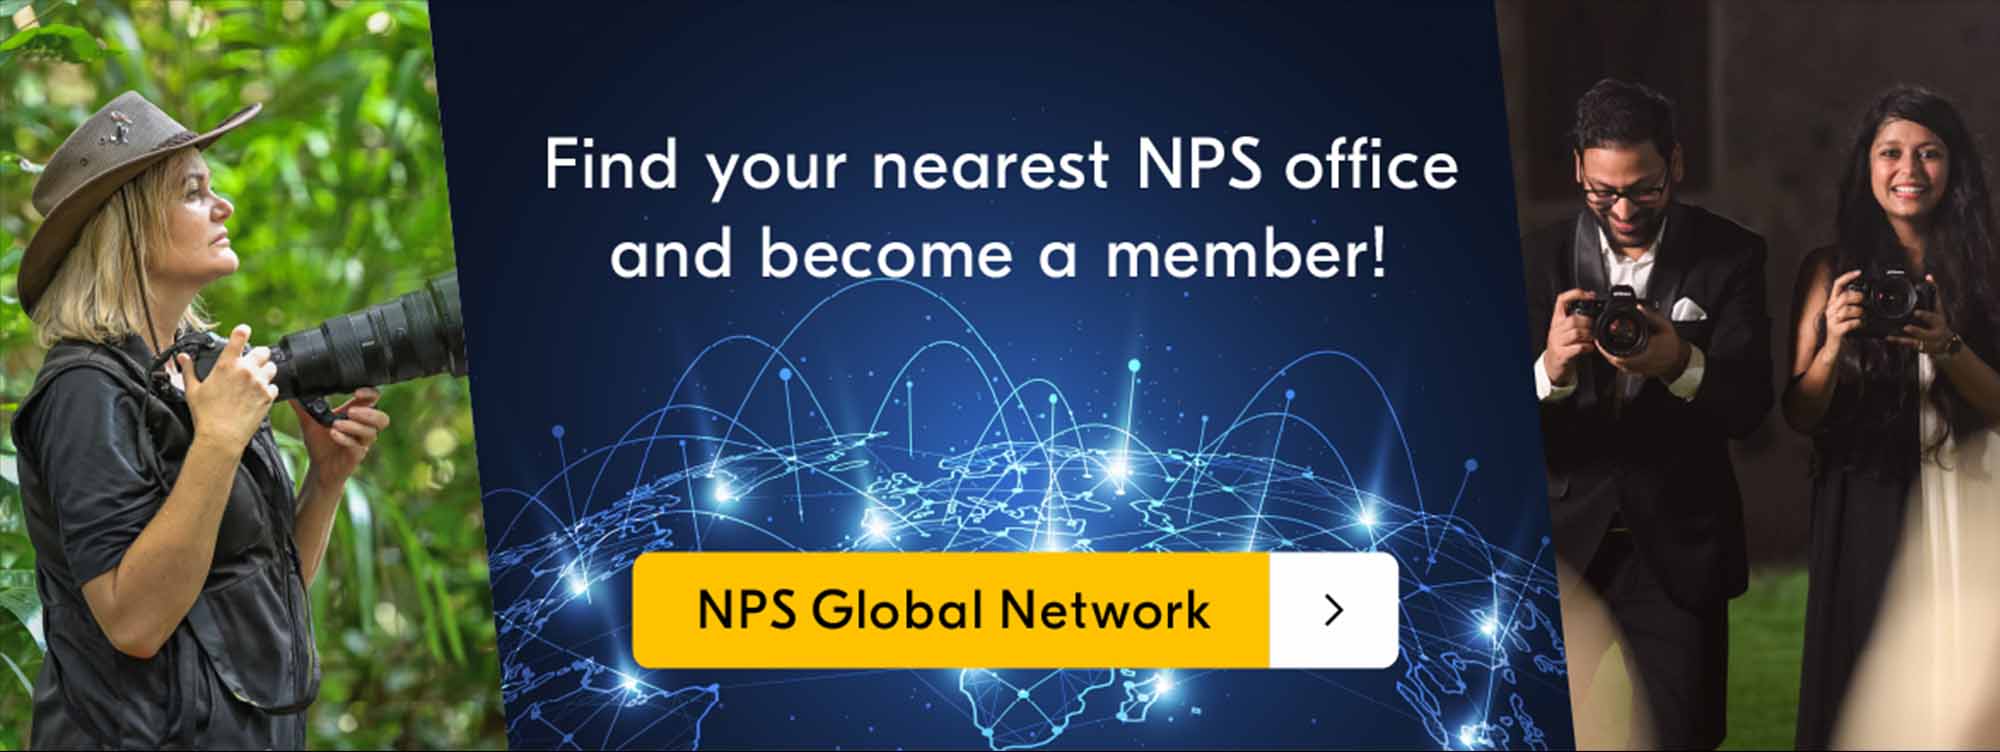 Find your nearest NPS office and become a member! NPS Global Network